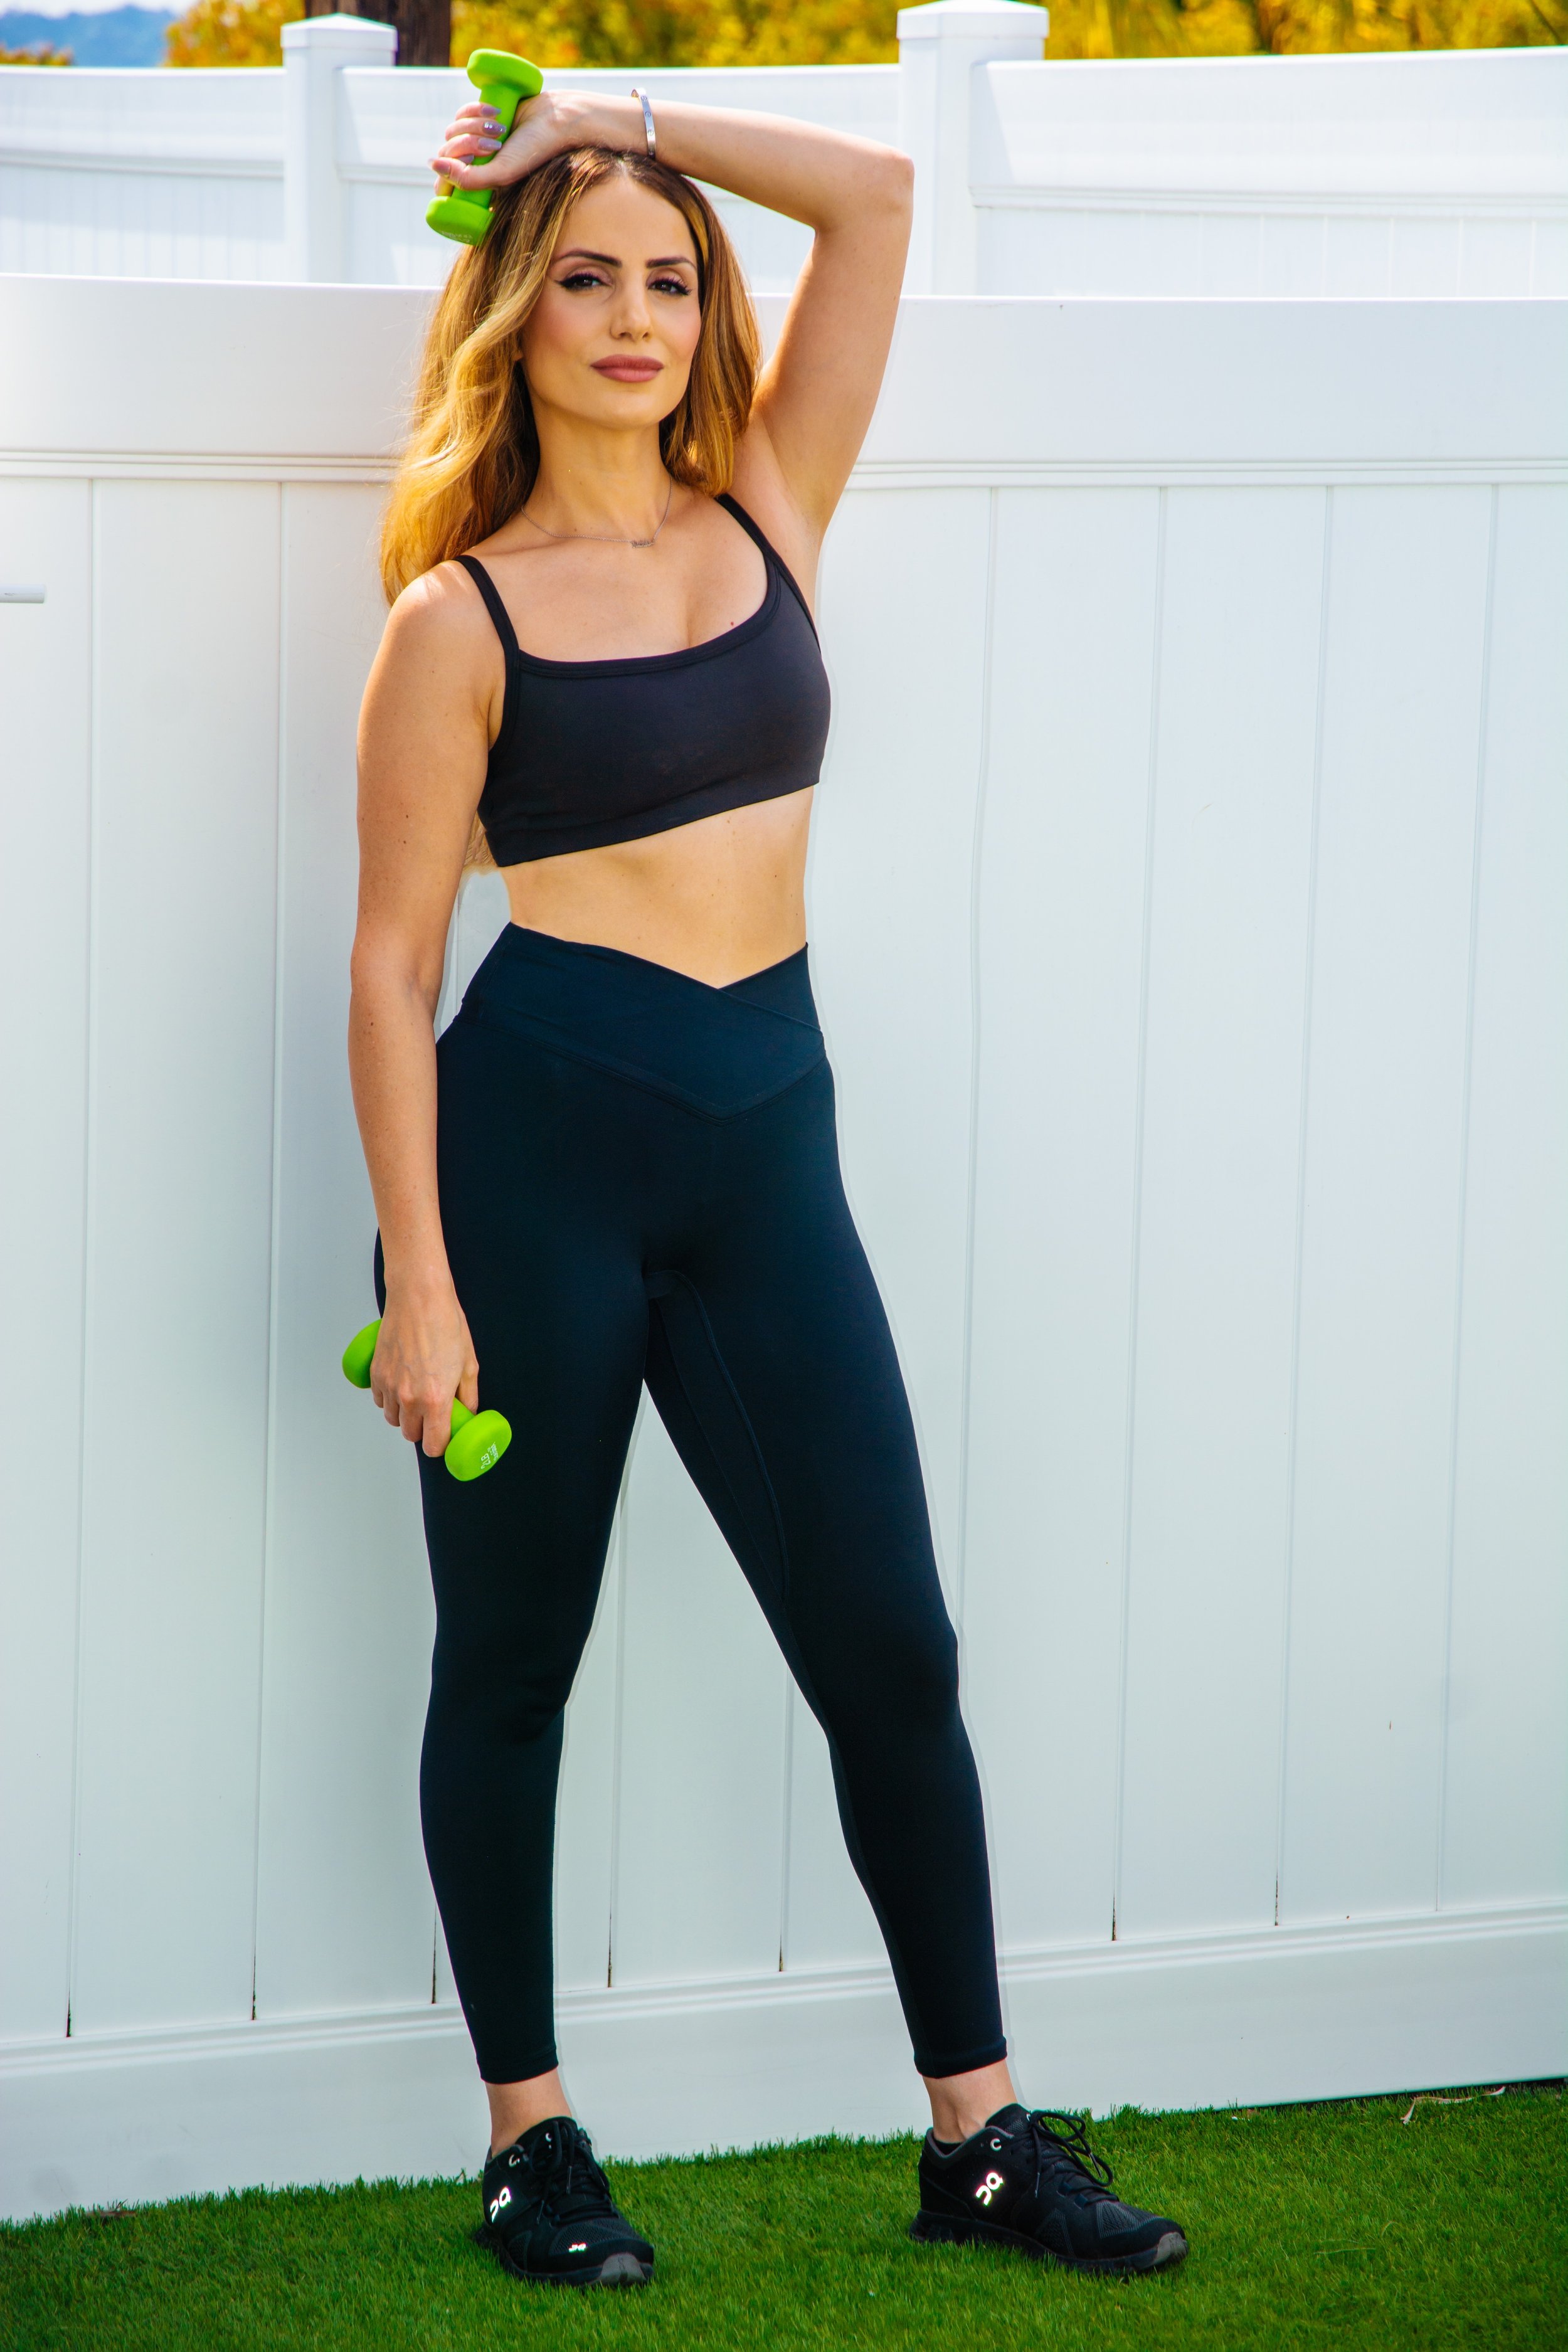 Are Gym Leggings Meant To Be Tighten